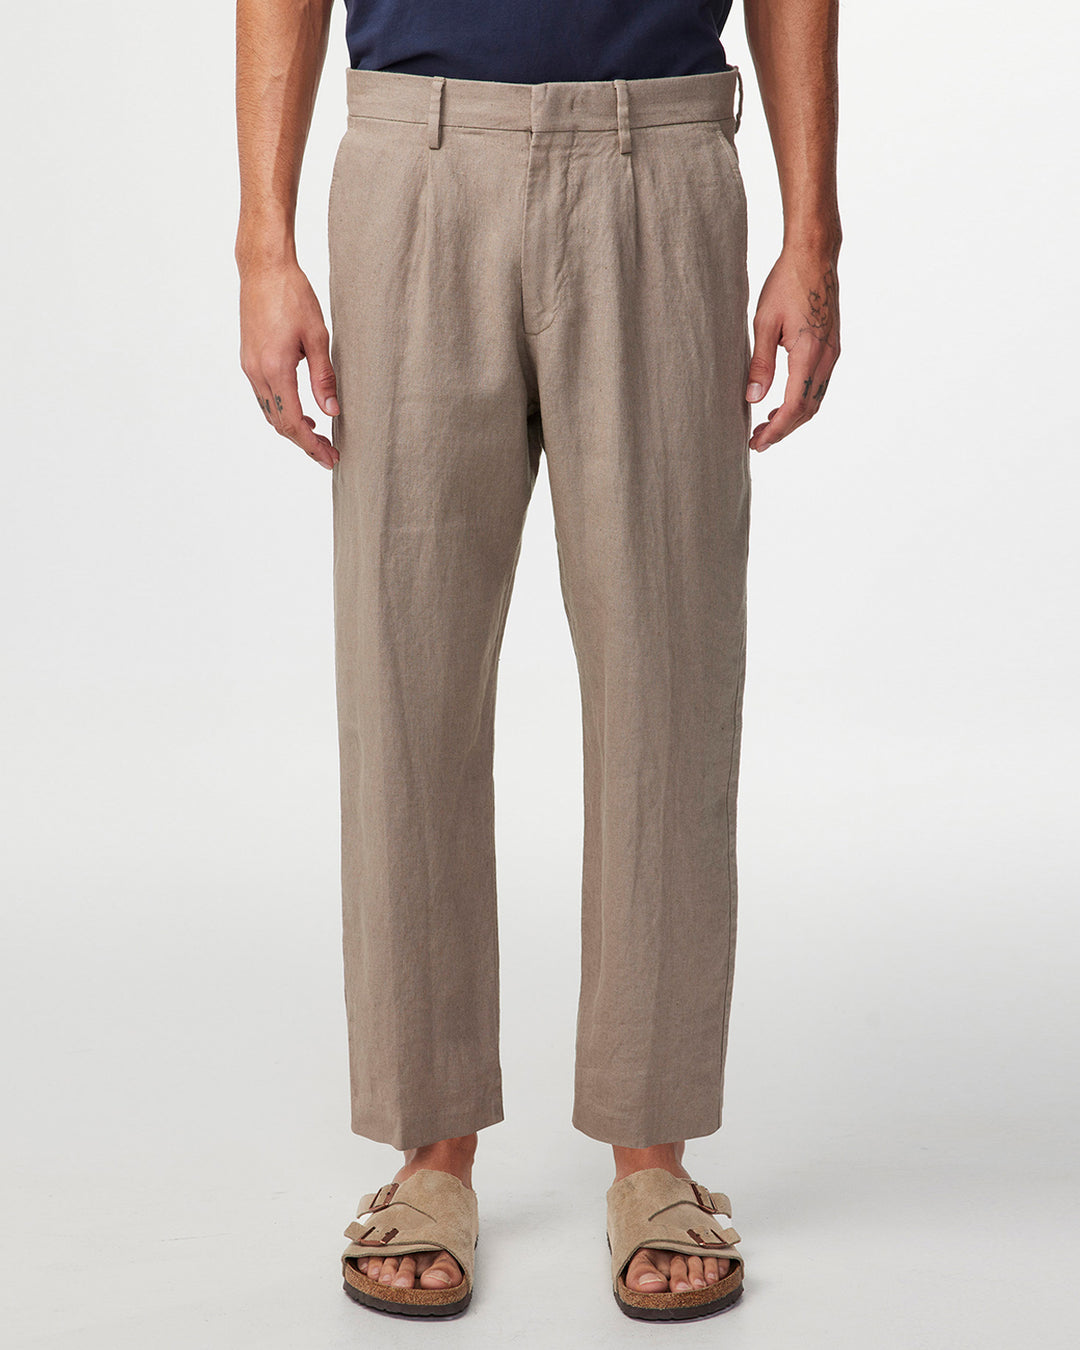 NN07 - Bill 1196 Linen Pant in Greige | Buster McGee